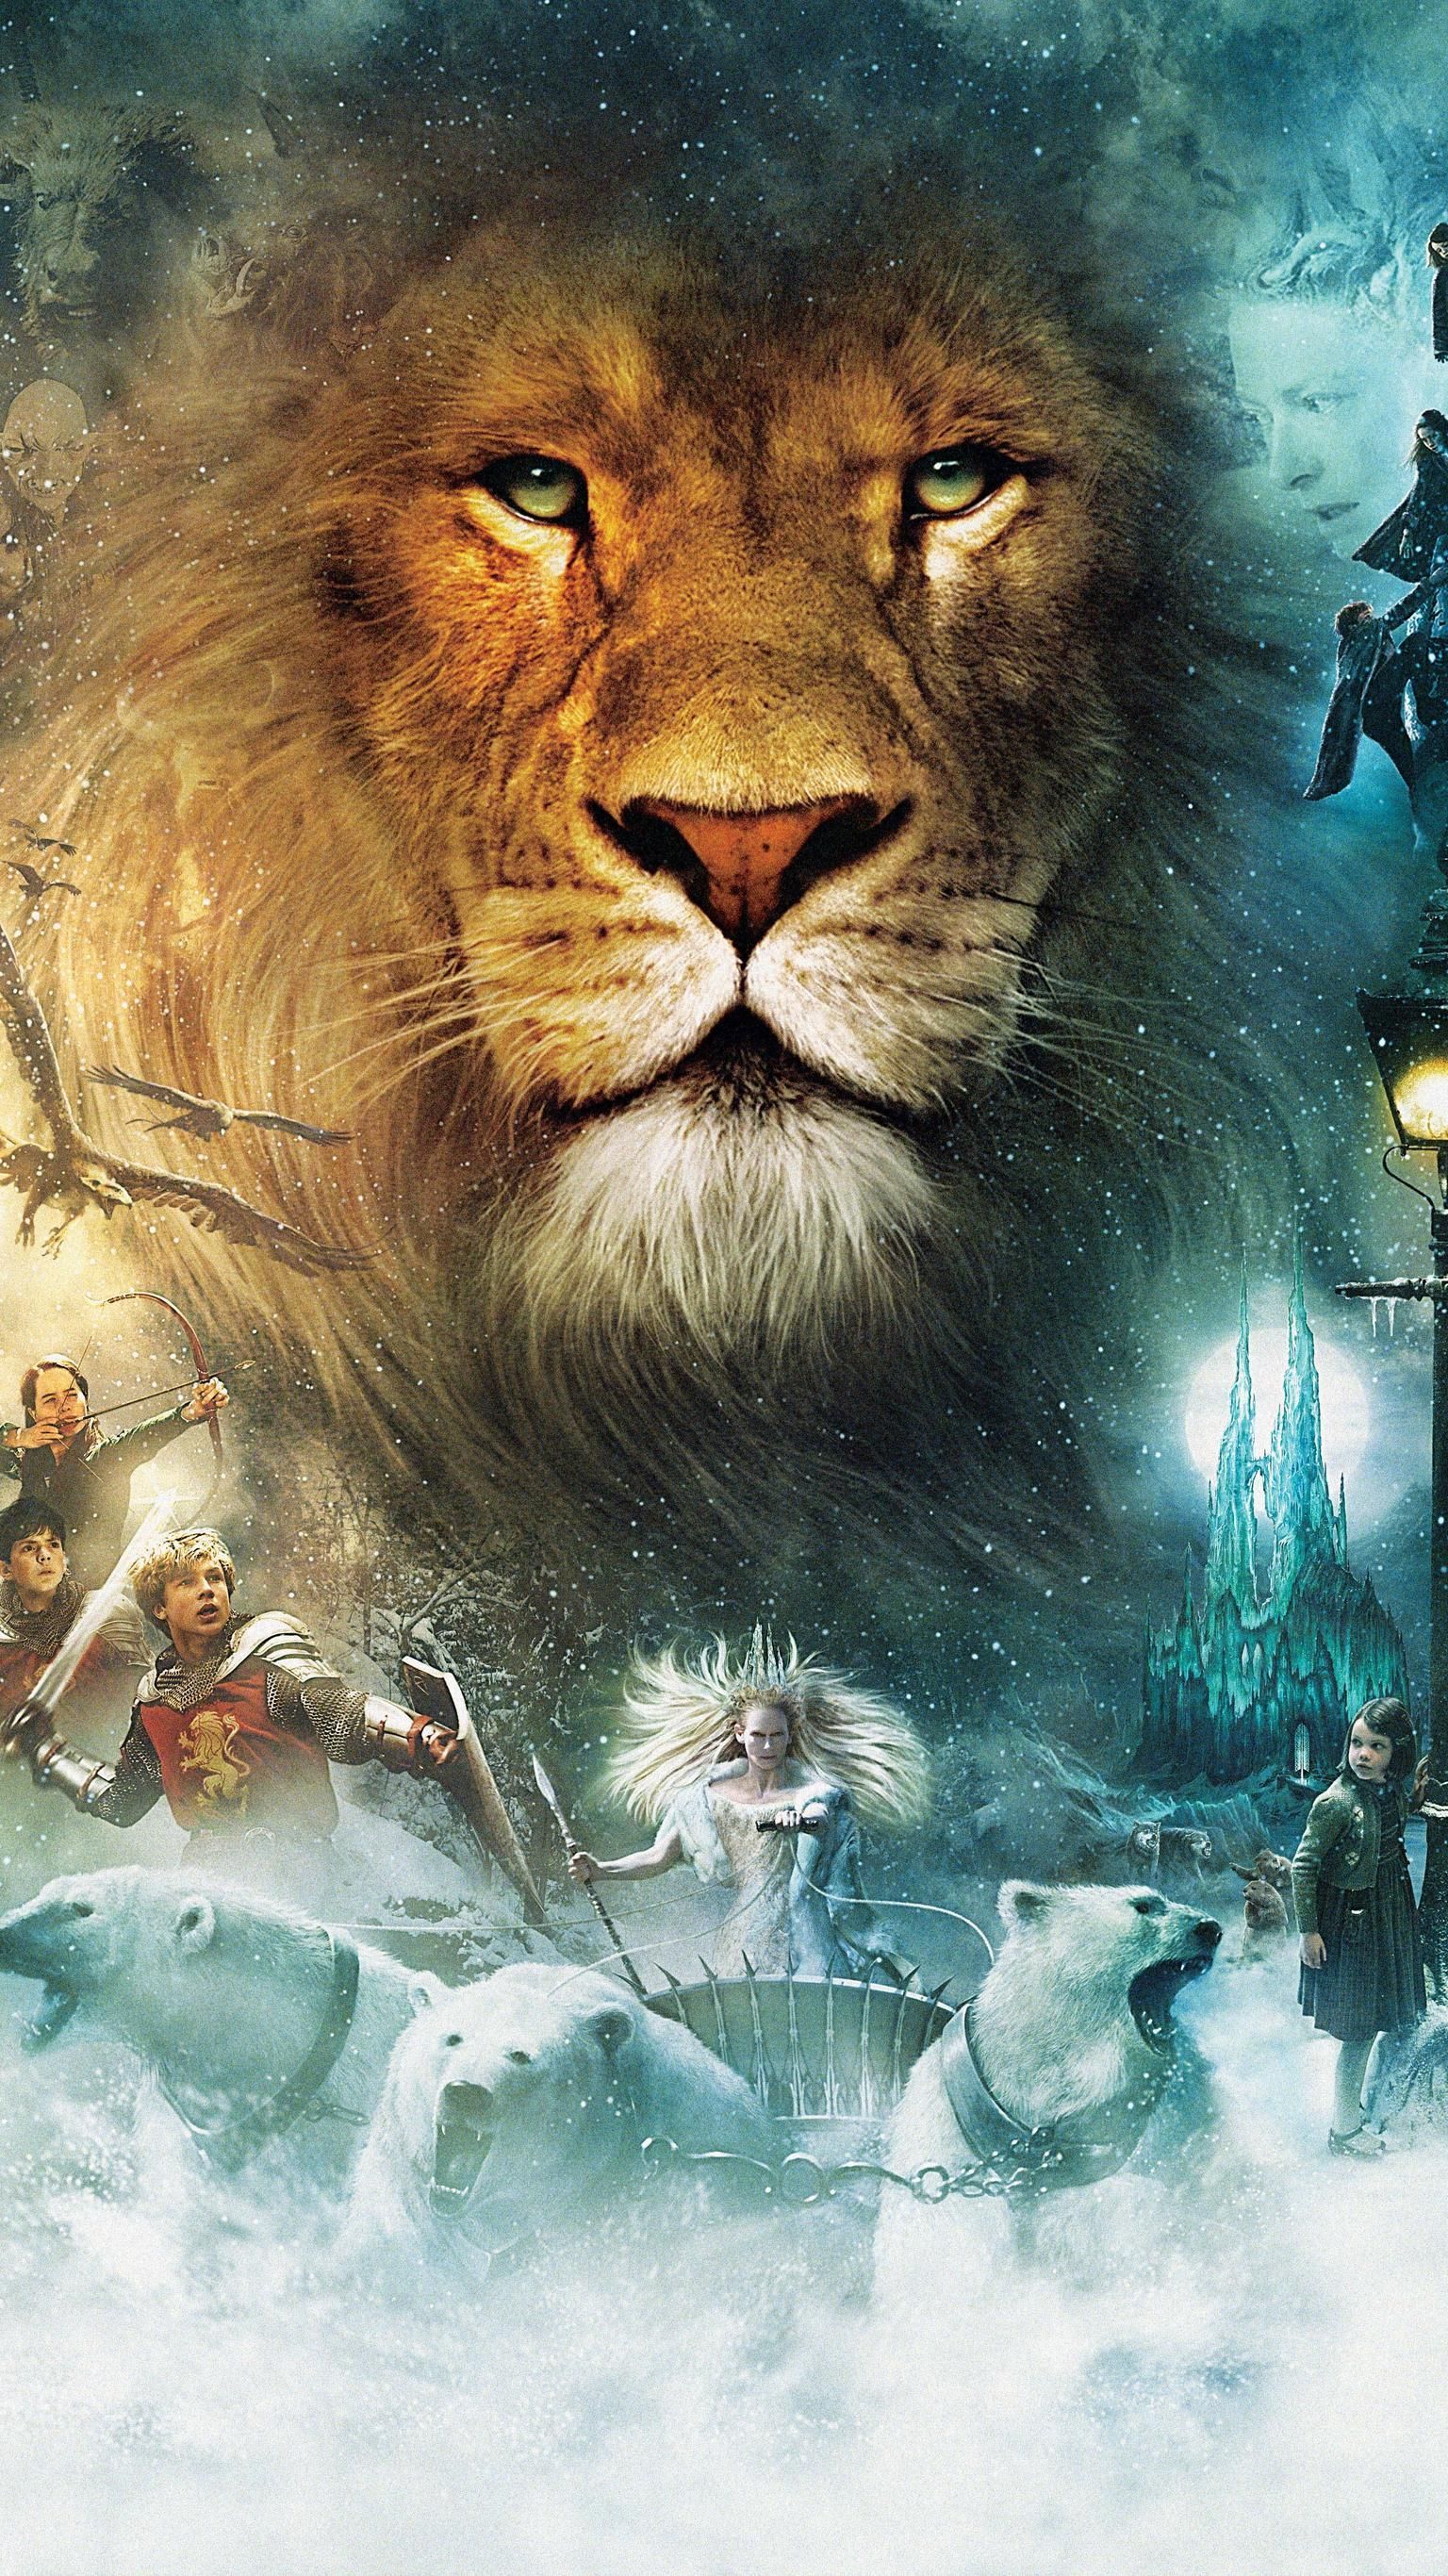 The Chronicles of Narnia: The Lion, the Witch and the Wardrobe (2005) Phone Wallpaper. Moviemania #avengerspictu. Chronicles of narnia, Aslan narnia, Narnia lion